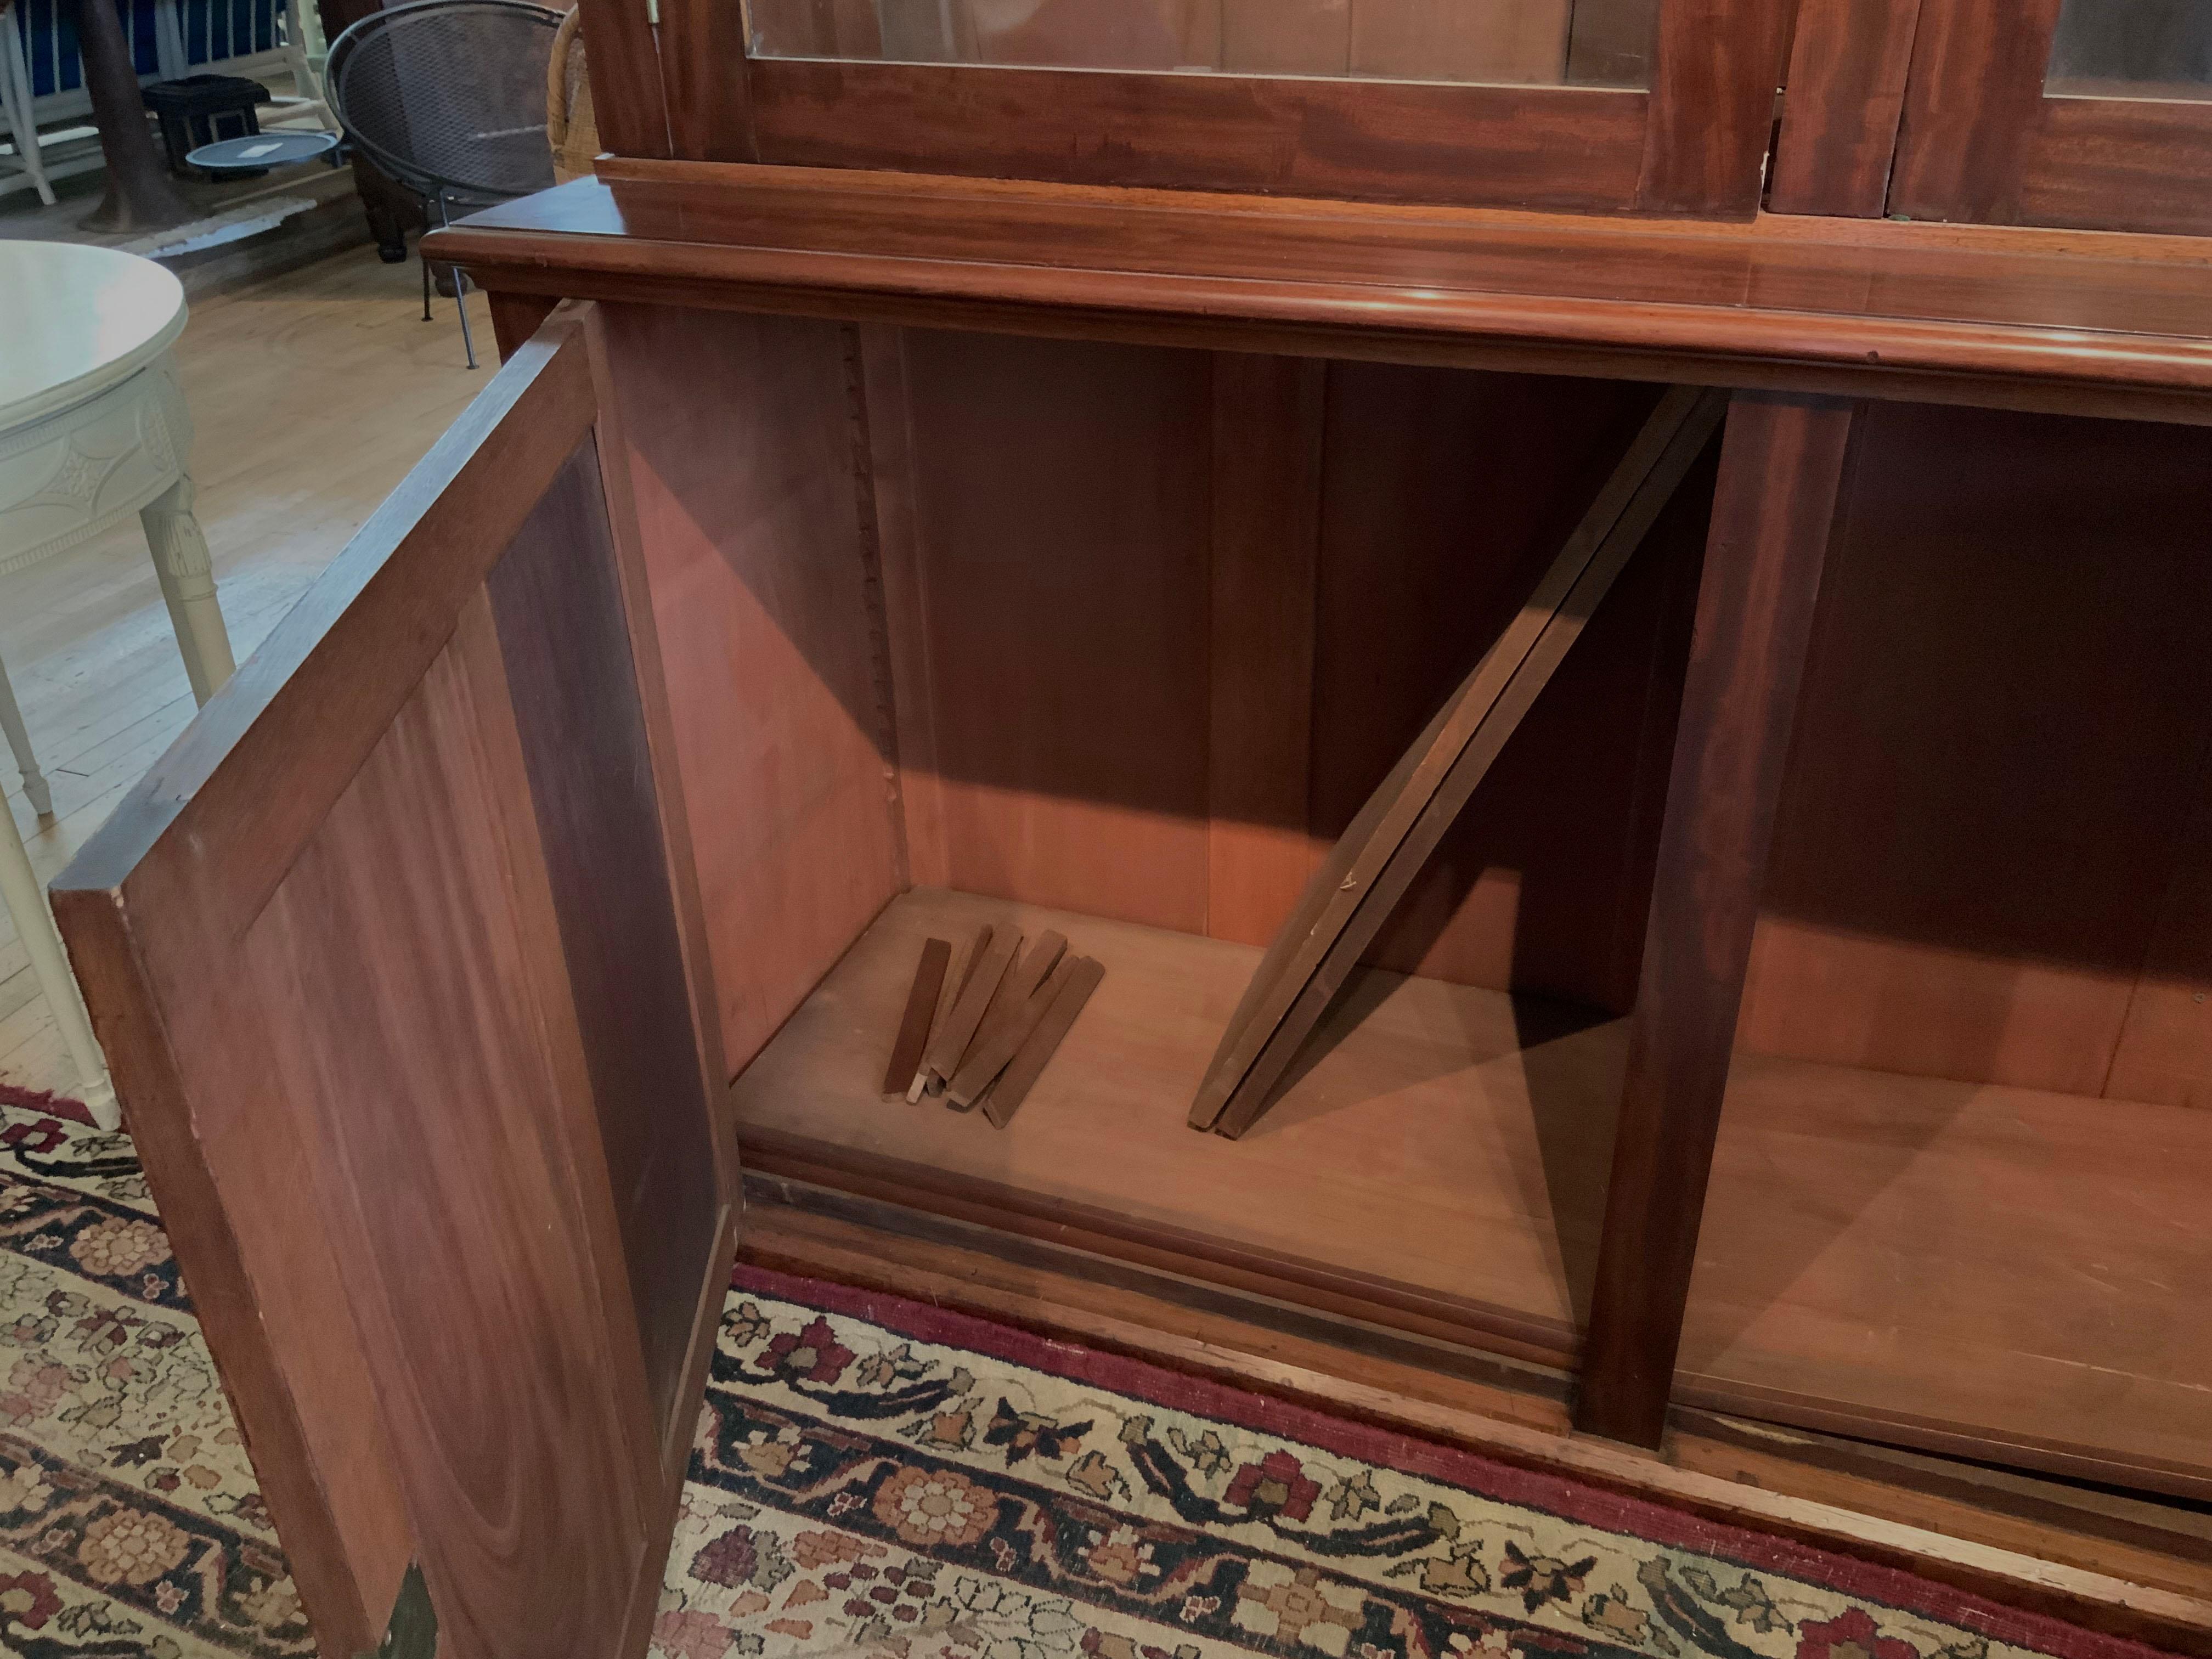 Mahogany 19th Century Classical Bookcase Cabinet from a Harvard Library